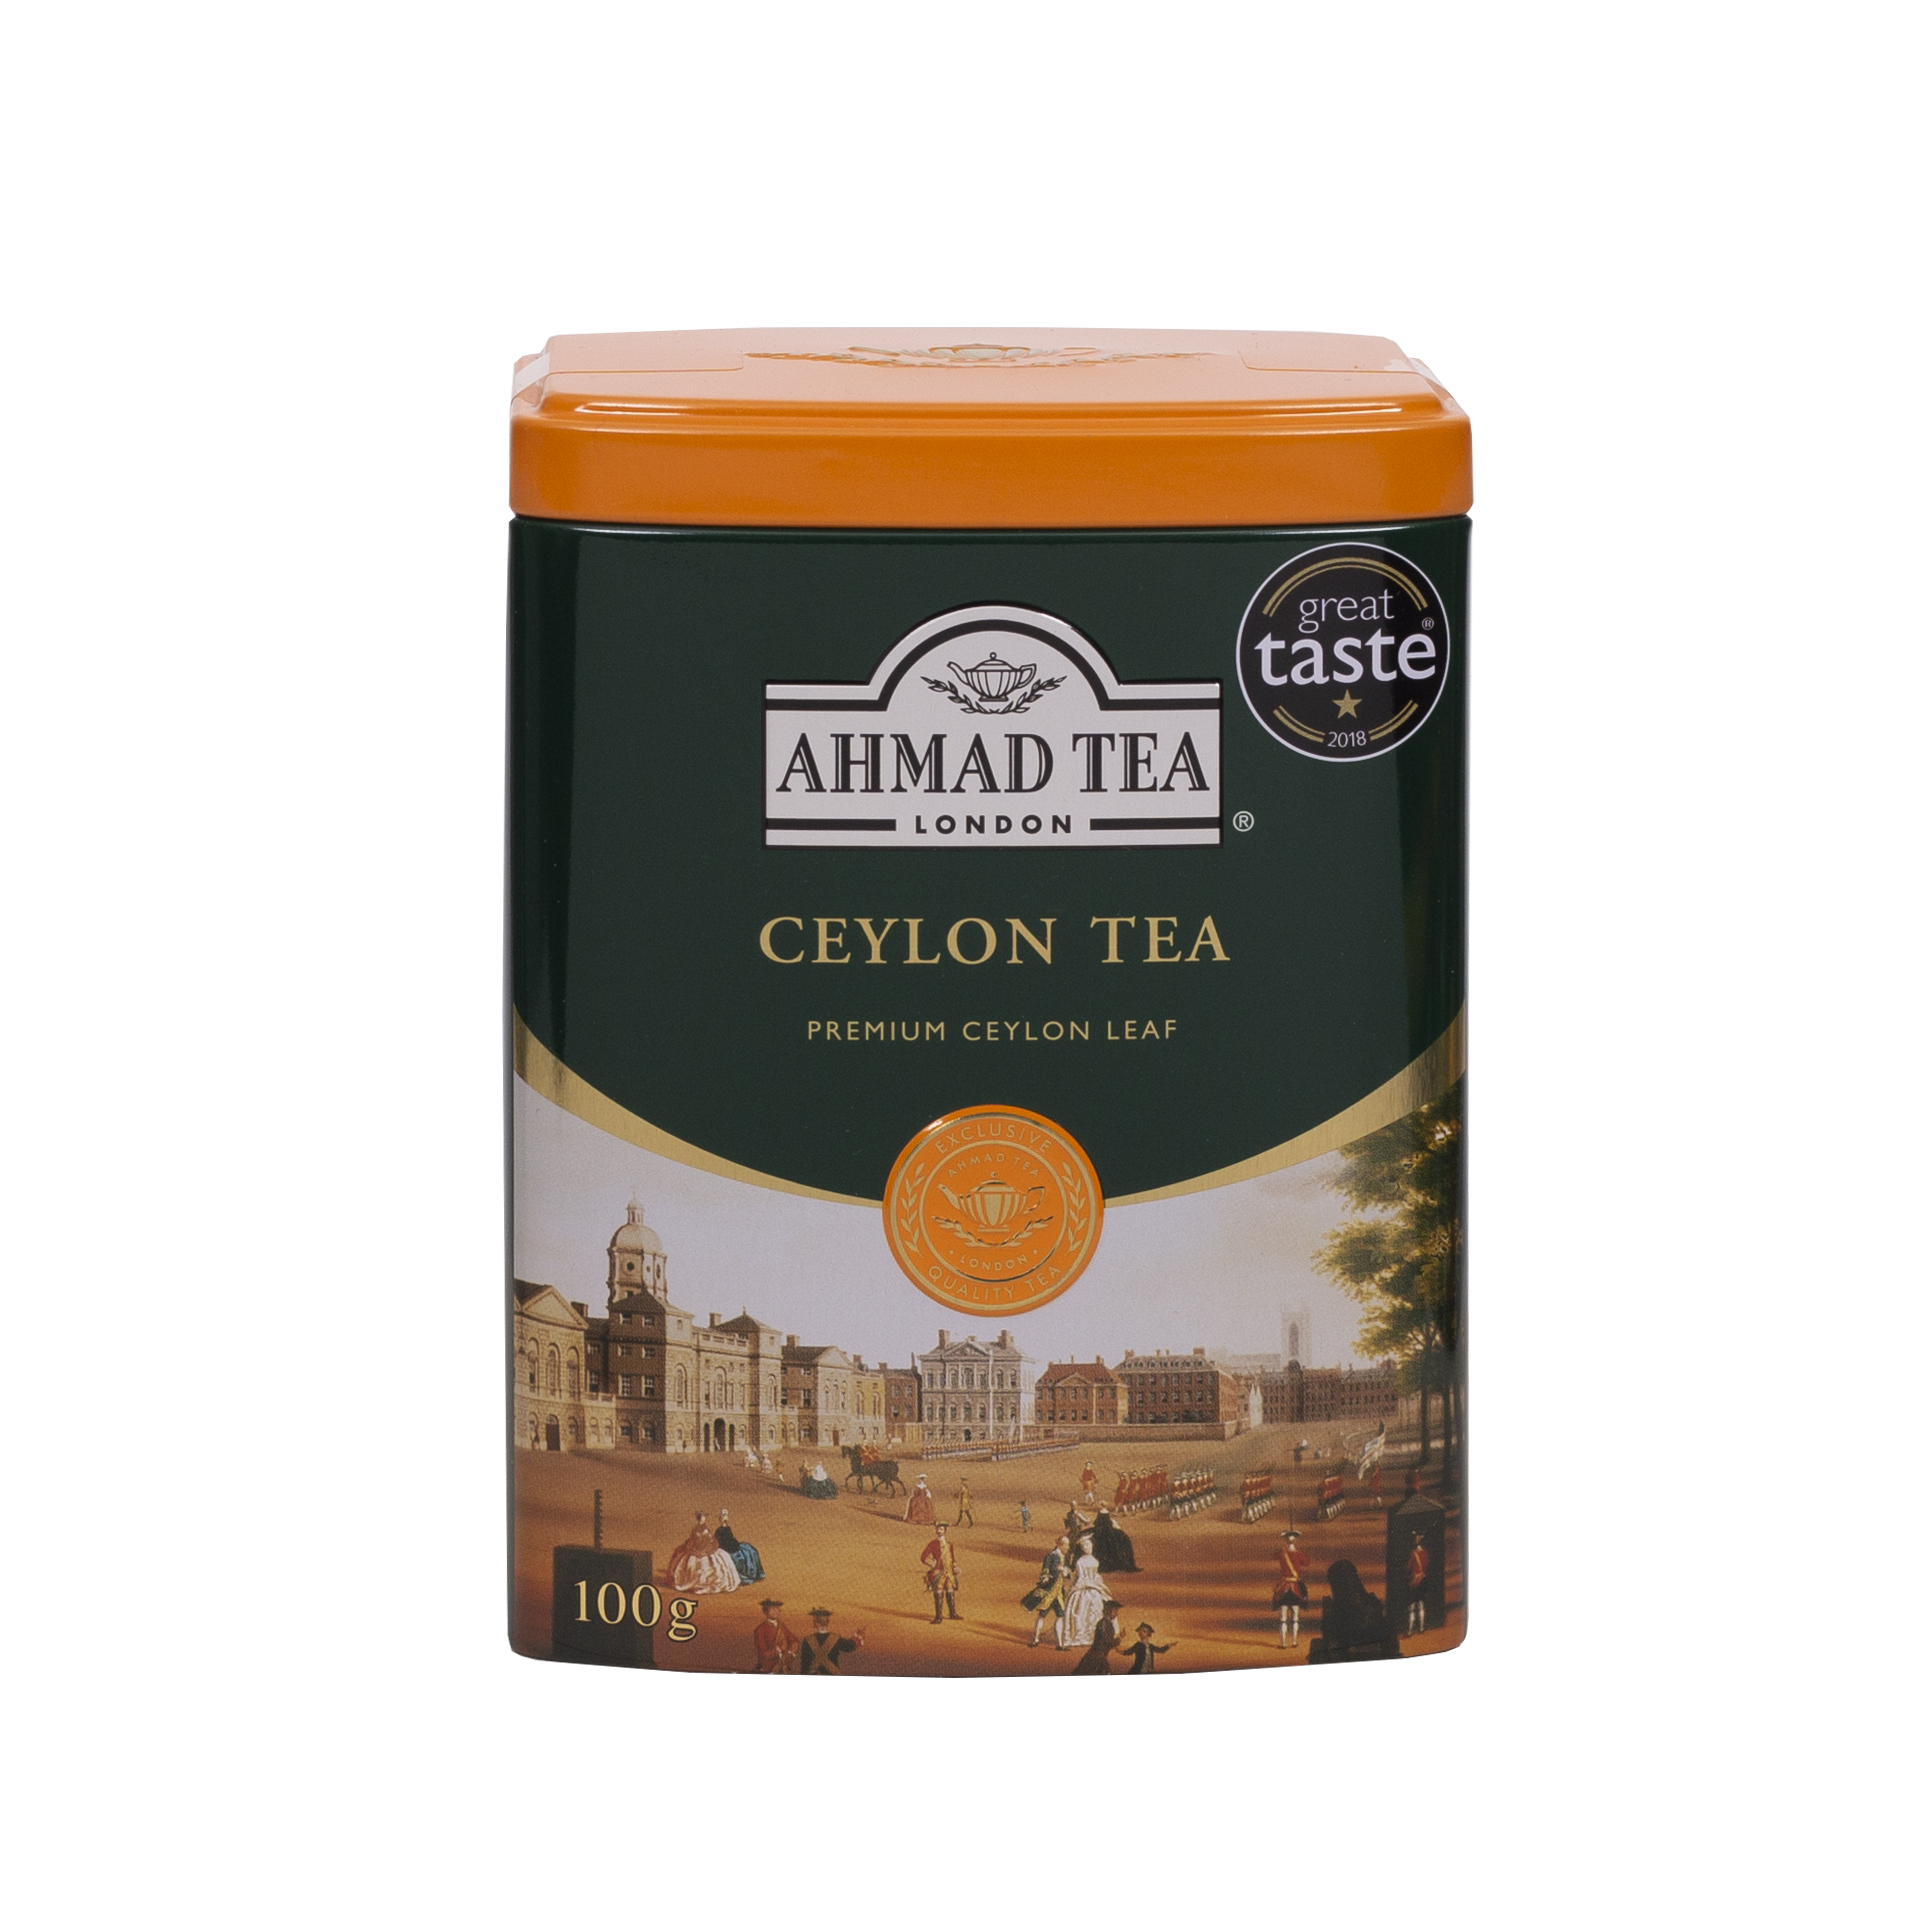 Picture is of a 100g Ceylon tea caddy